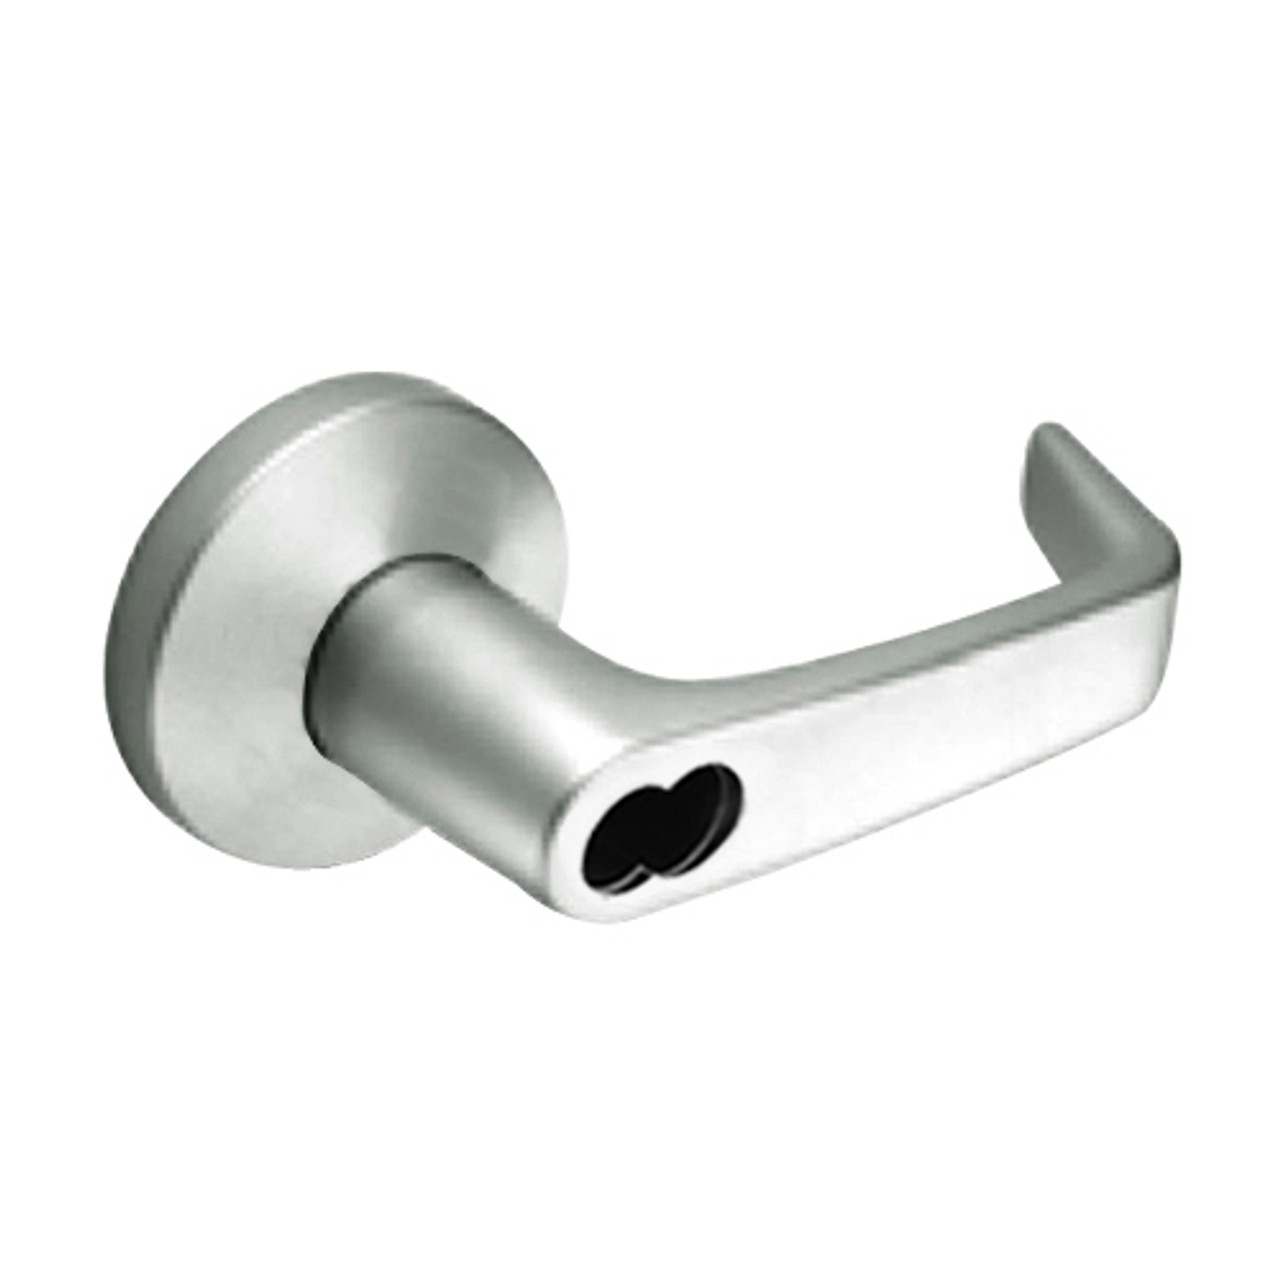 9K57E15KS3619 Best 9K Series Service Station Cylindrical Lever Locks with Contour Angle with Return Lever Design Accept 7 Pin Best Core in Satin Nickel